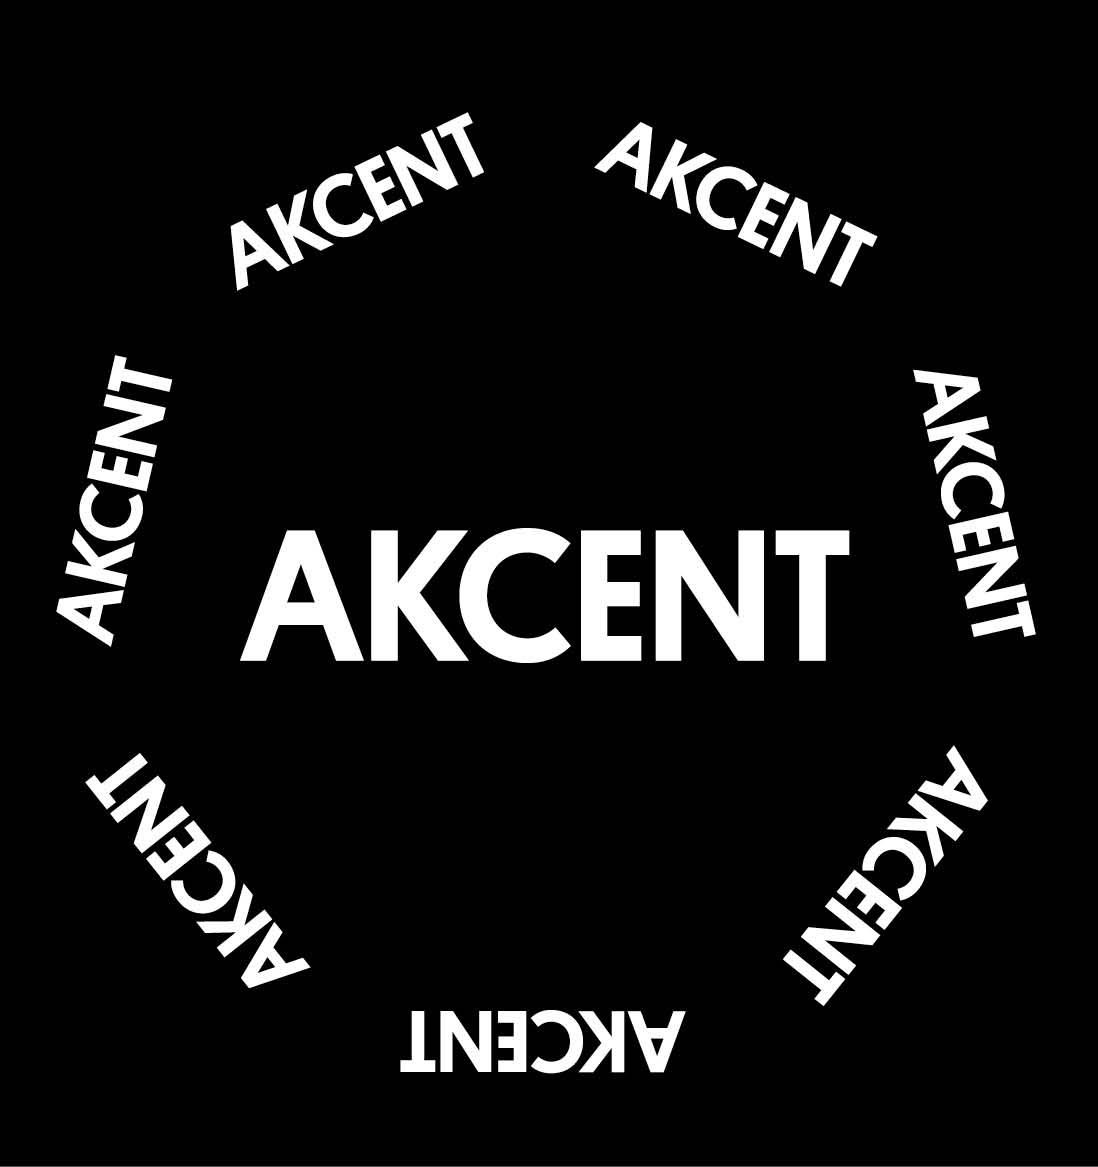 Programme of the AKCENT festival